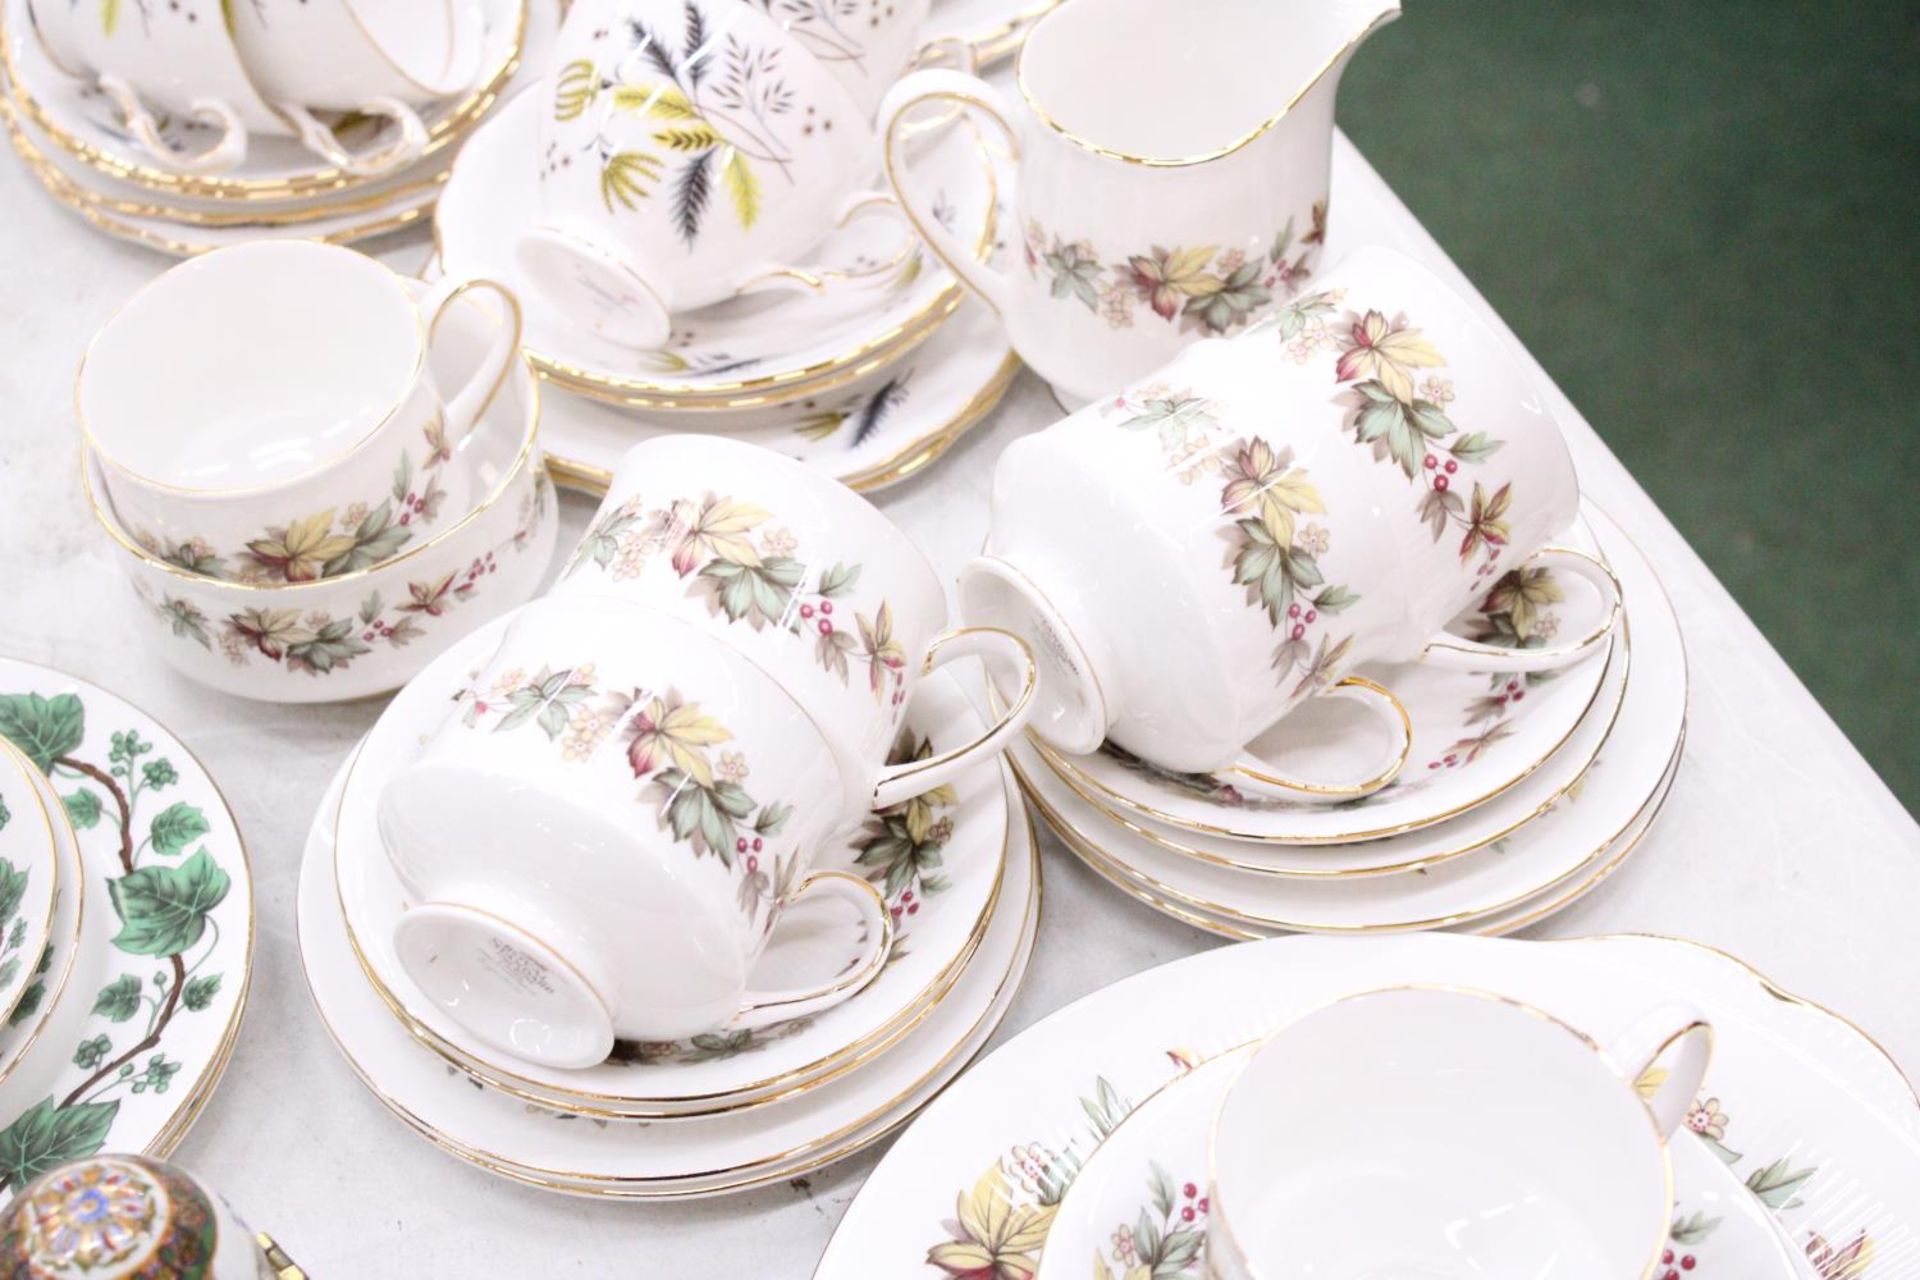 A QUANTITY OF CHINA TEAWARE TO INCLUDE ROYAL STANDARD AND COLCLOUGH - CUPS, SAUCERS, SIDE PLATES, - Image 3 of 5